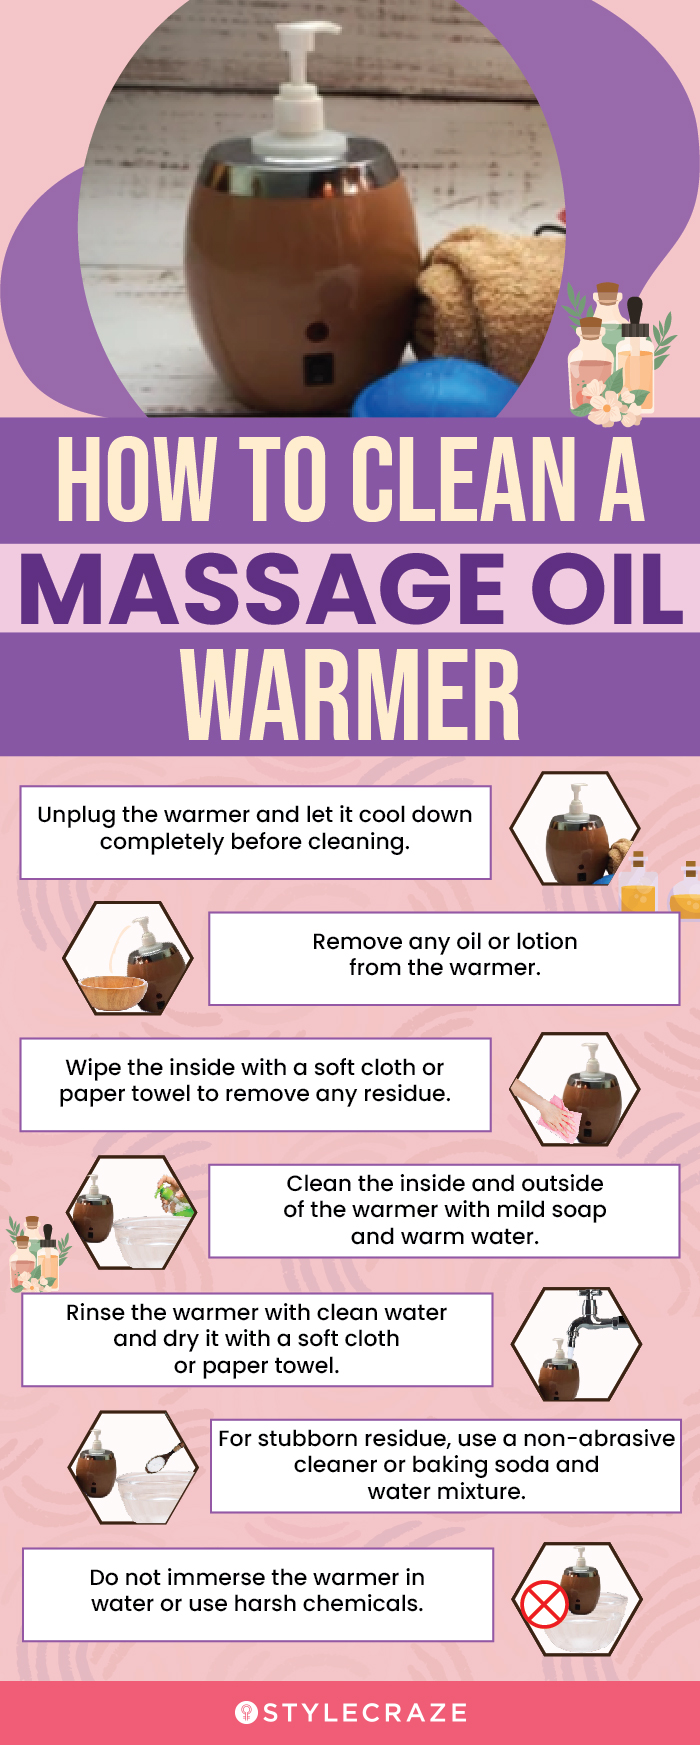 How To Clean A Massage Oil Warmer (infographic)